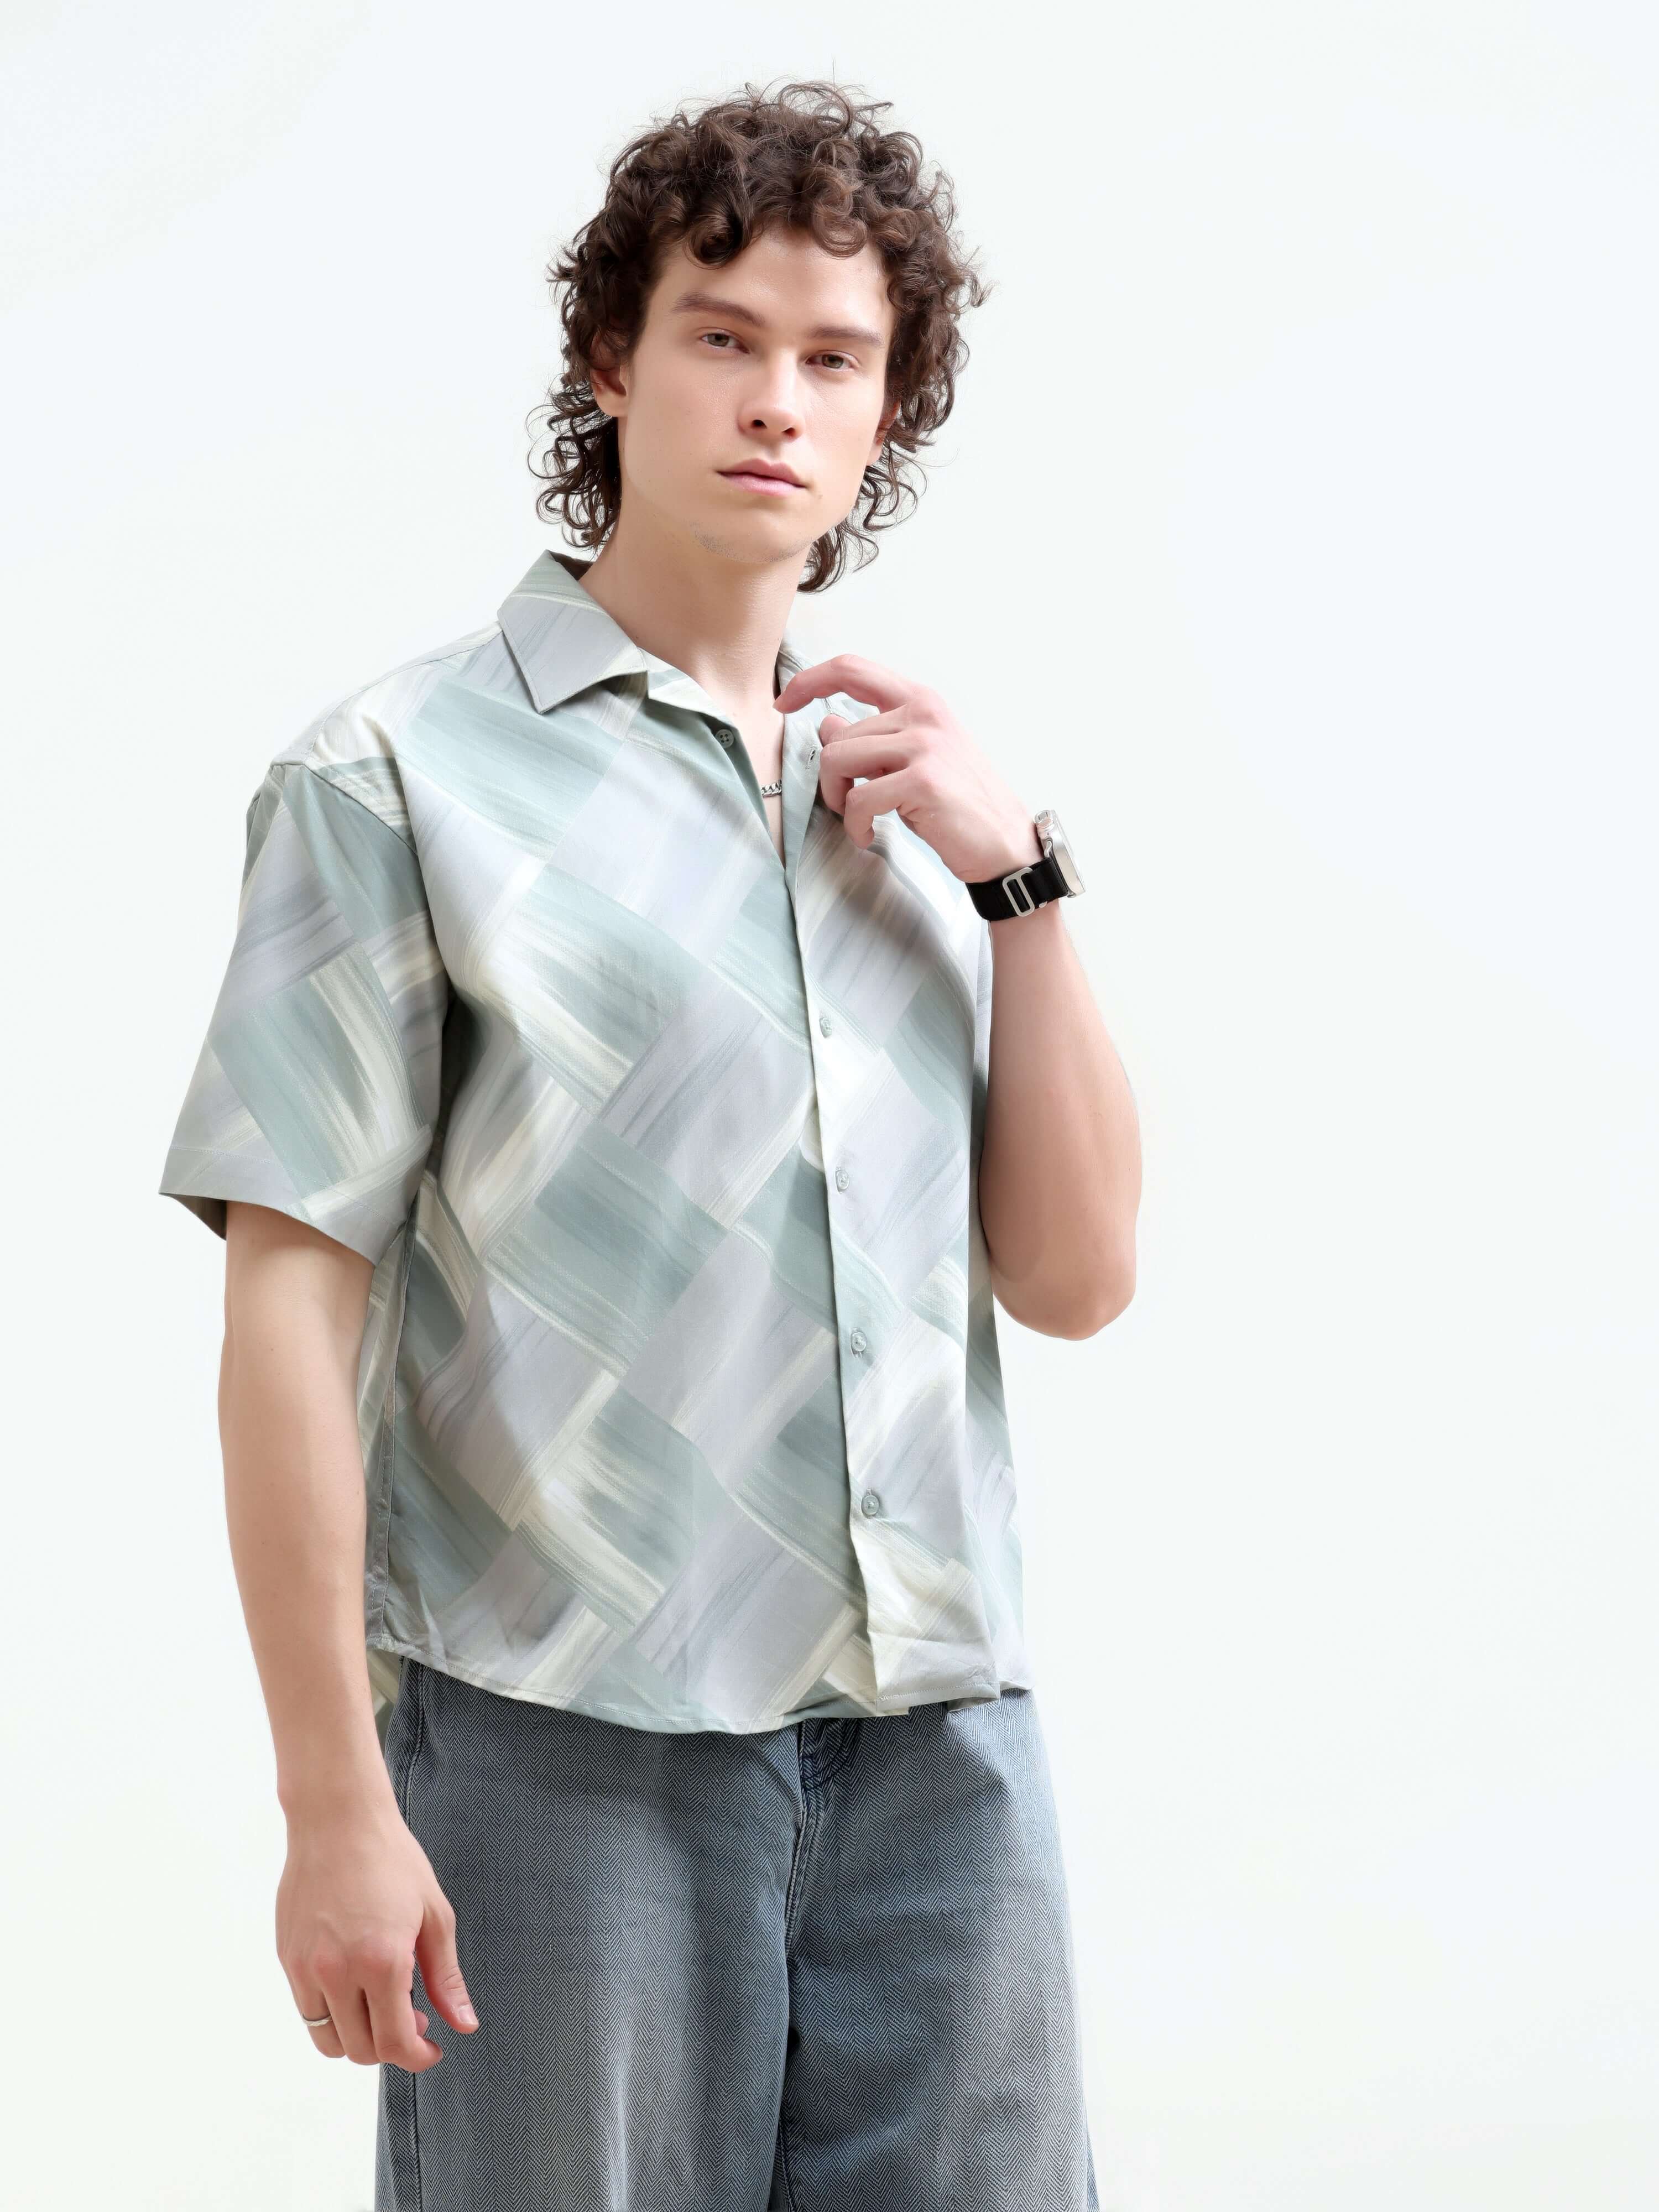 Minos Green Printed Oversized Shirt - Summer Casual shop online at Estilocus. Embrace summer with our Minos oversized shirt for men. Lightweight, breathable rayon fabric for ultimate comfort. Shop new arrivals!